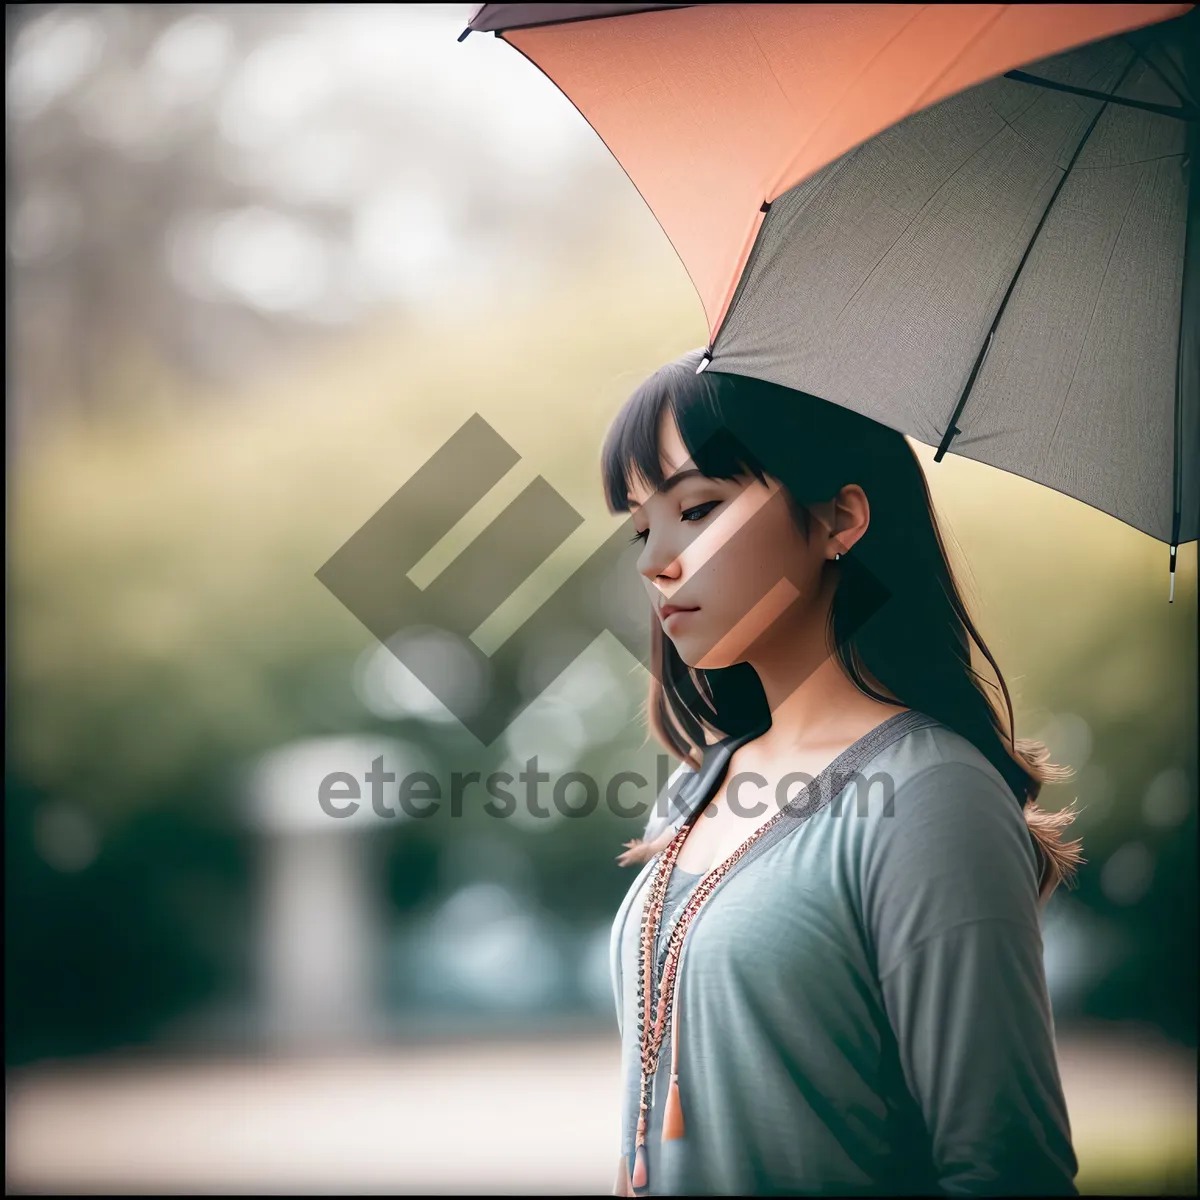 Picture of Happy Smiling Woman with Pretty Parasol in Rain